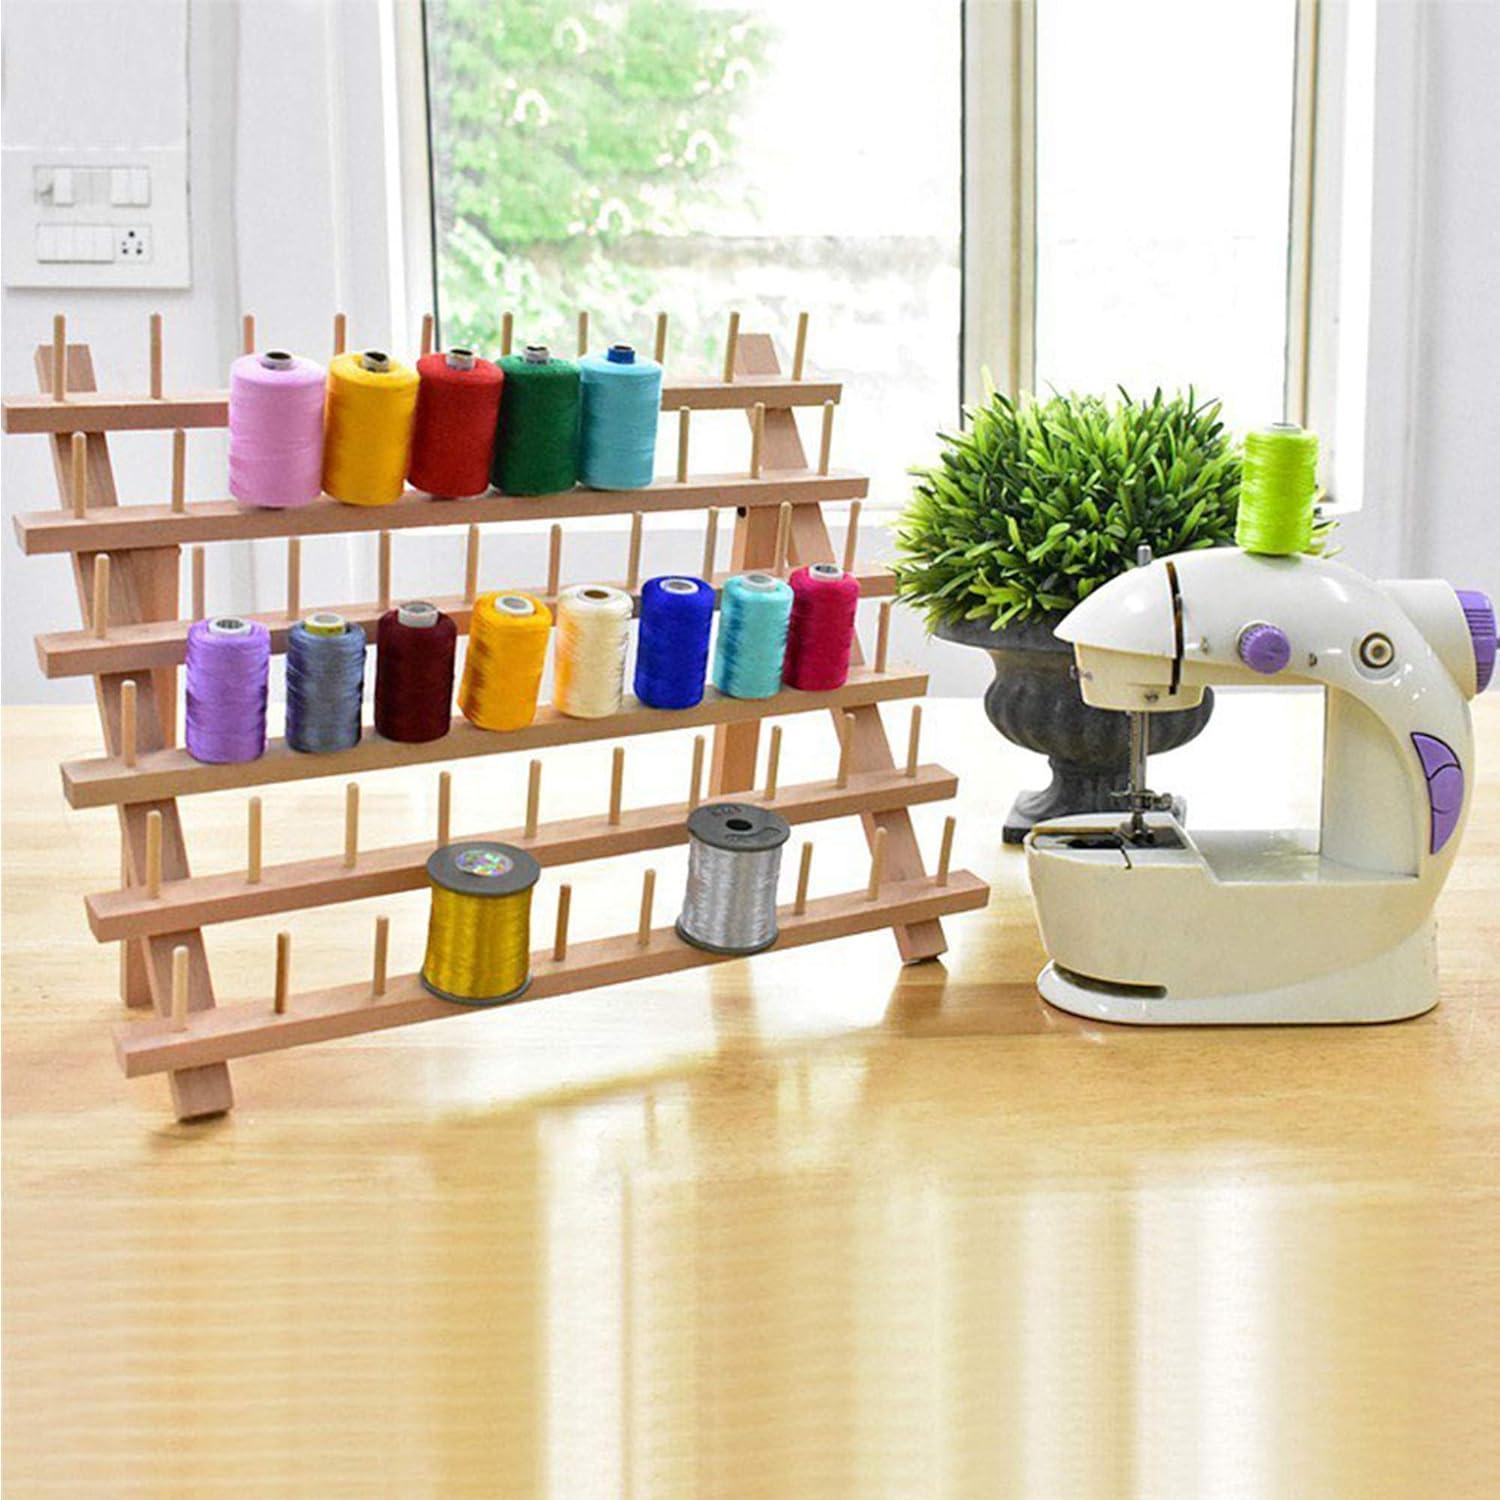 Sewing Holder Embroidery Spool  Embroidery Thread 3 Spool Rack